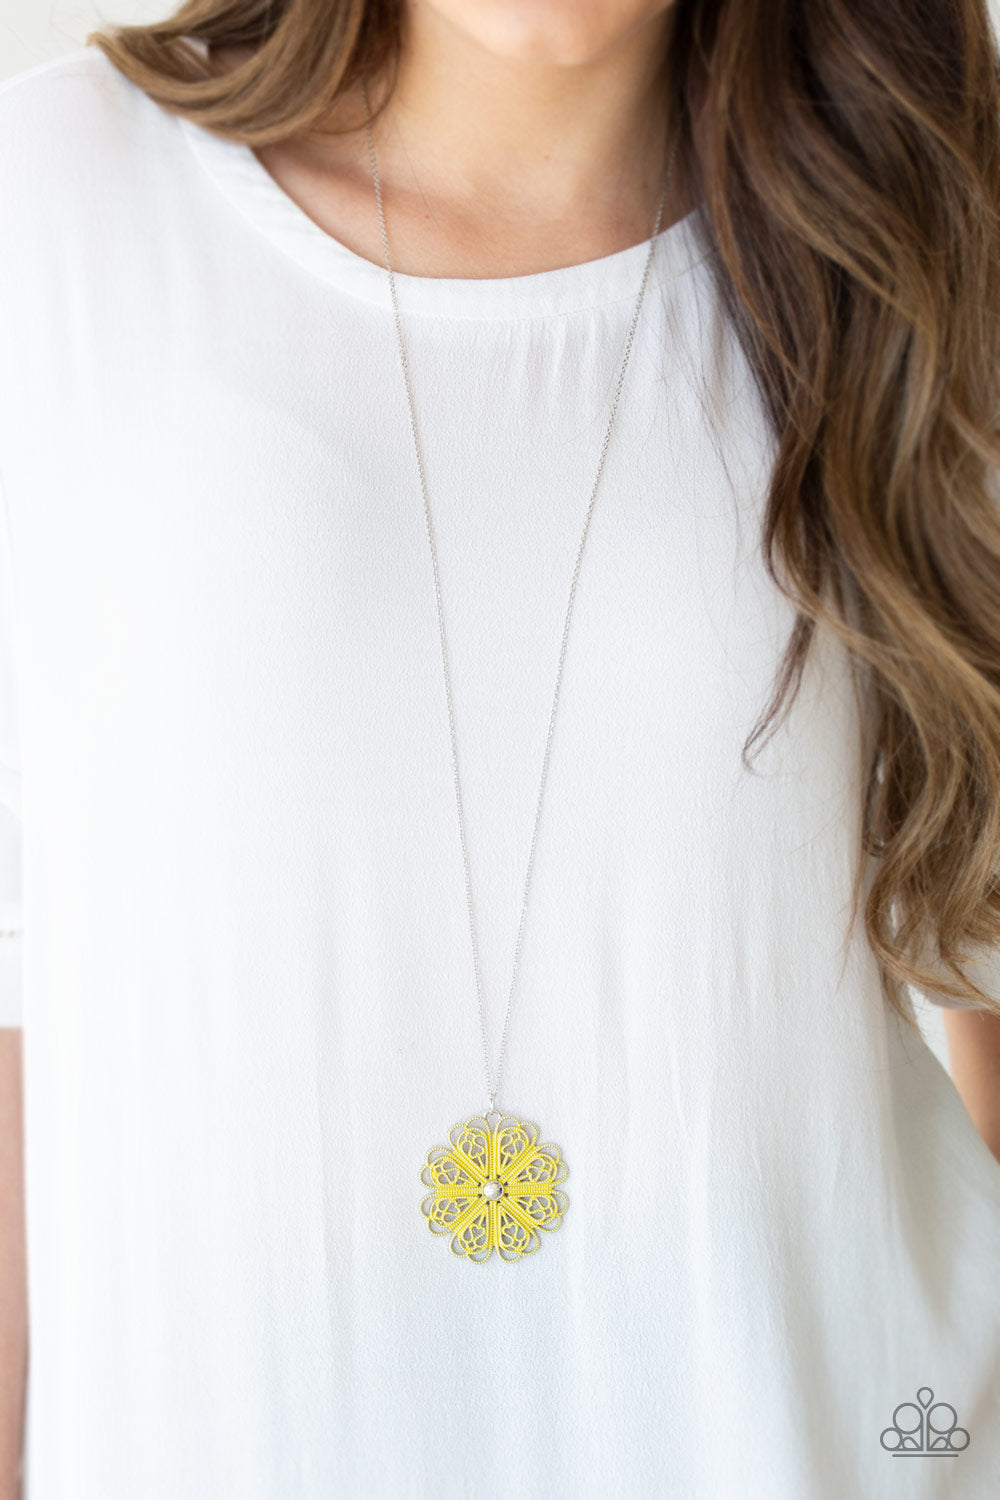 Paparazzi Accessories - Spin Your PINWHEELS - Yellow Necklace